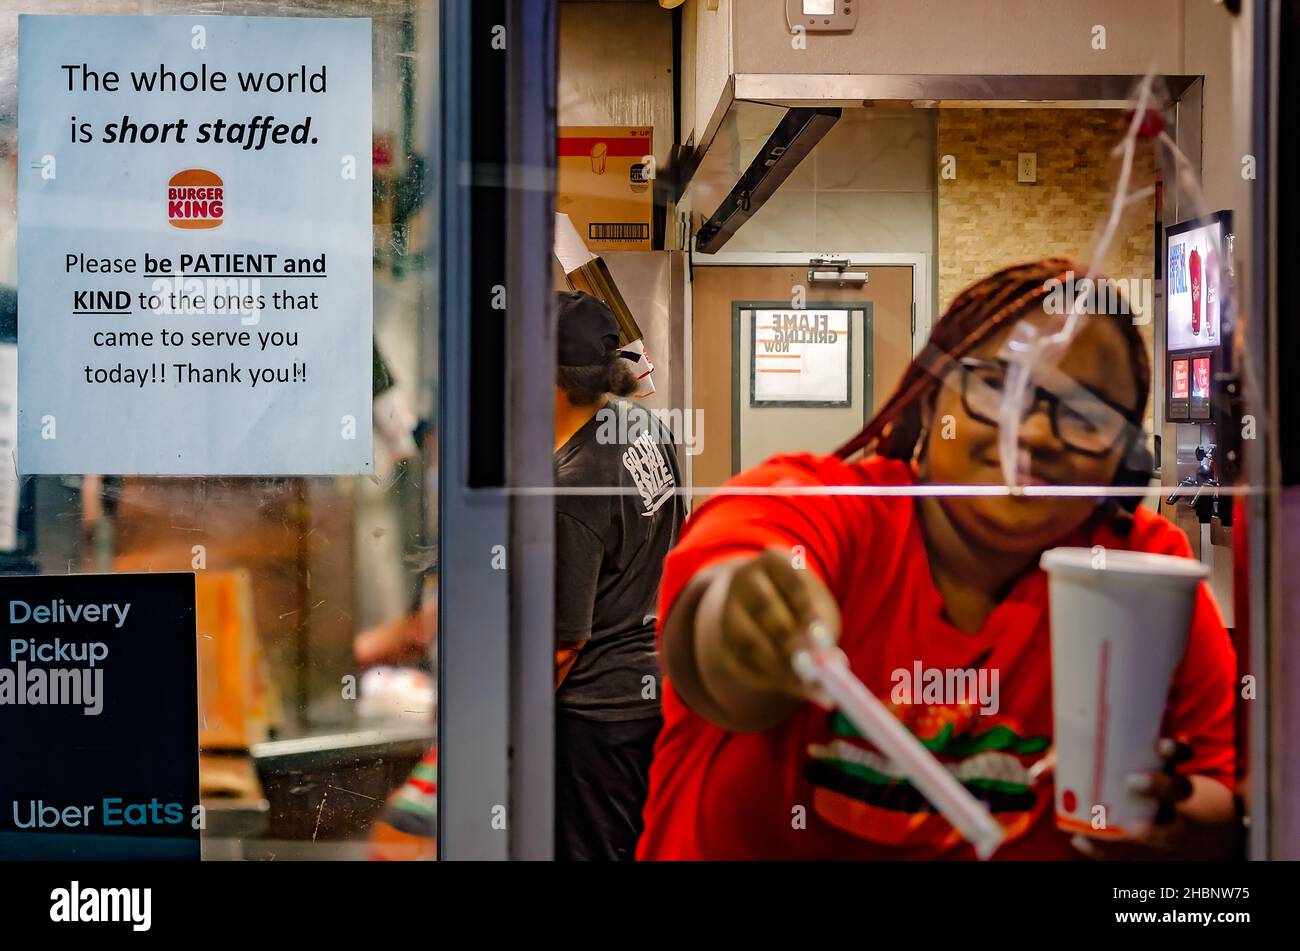 A sign at a Burger King drive-thru window encourages patrons to be patient and kind while the restaurant is short-staffed in Pascagoula, Mississippi. Stock Photo